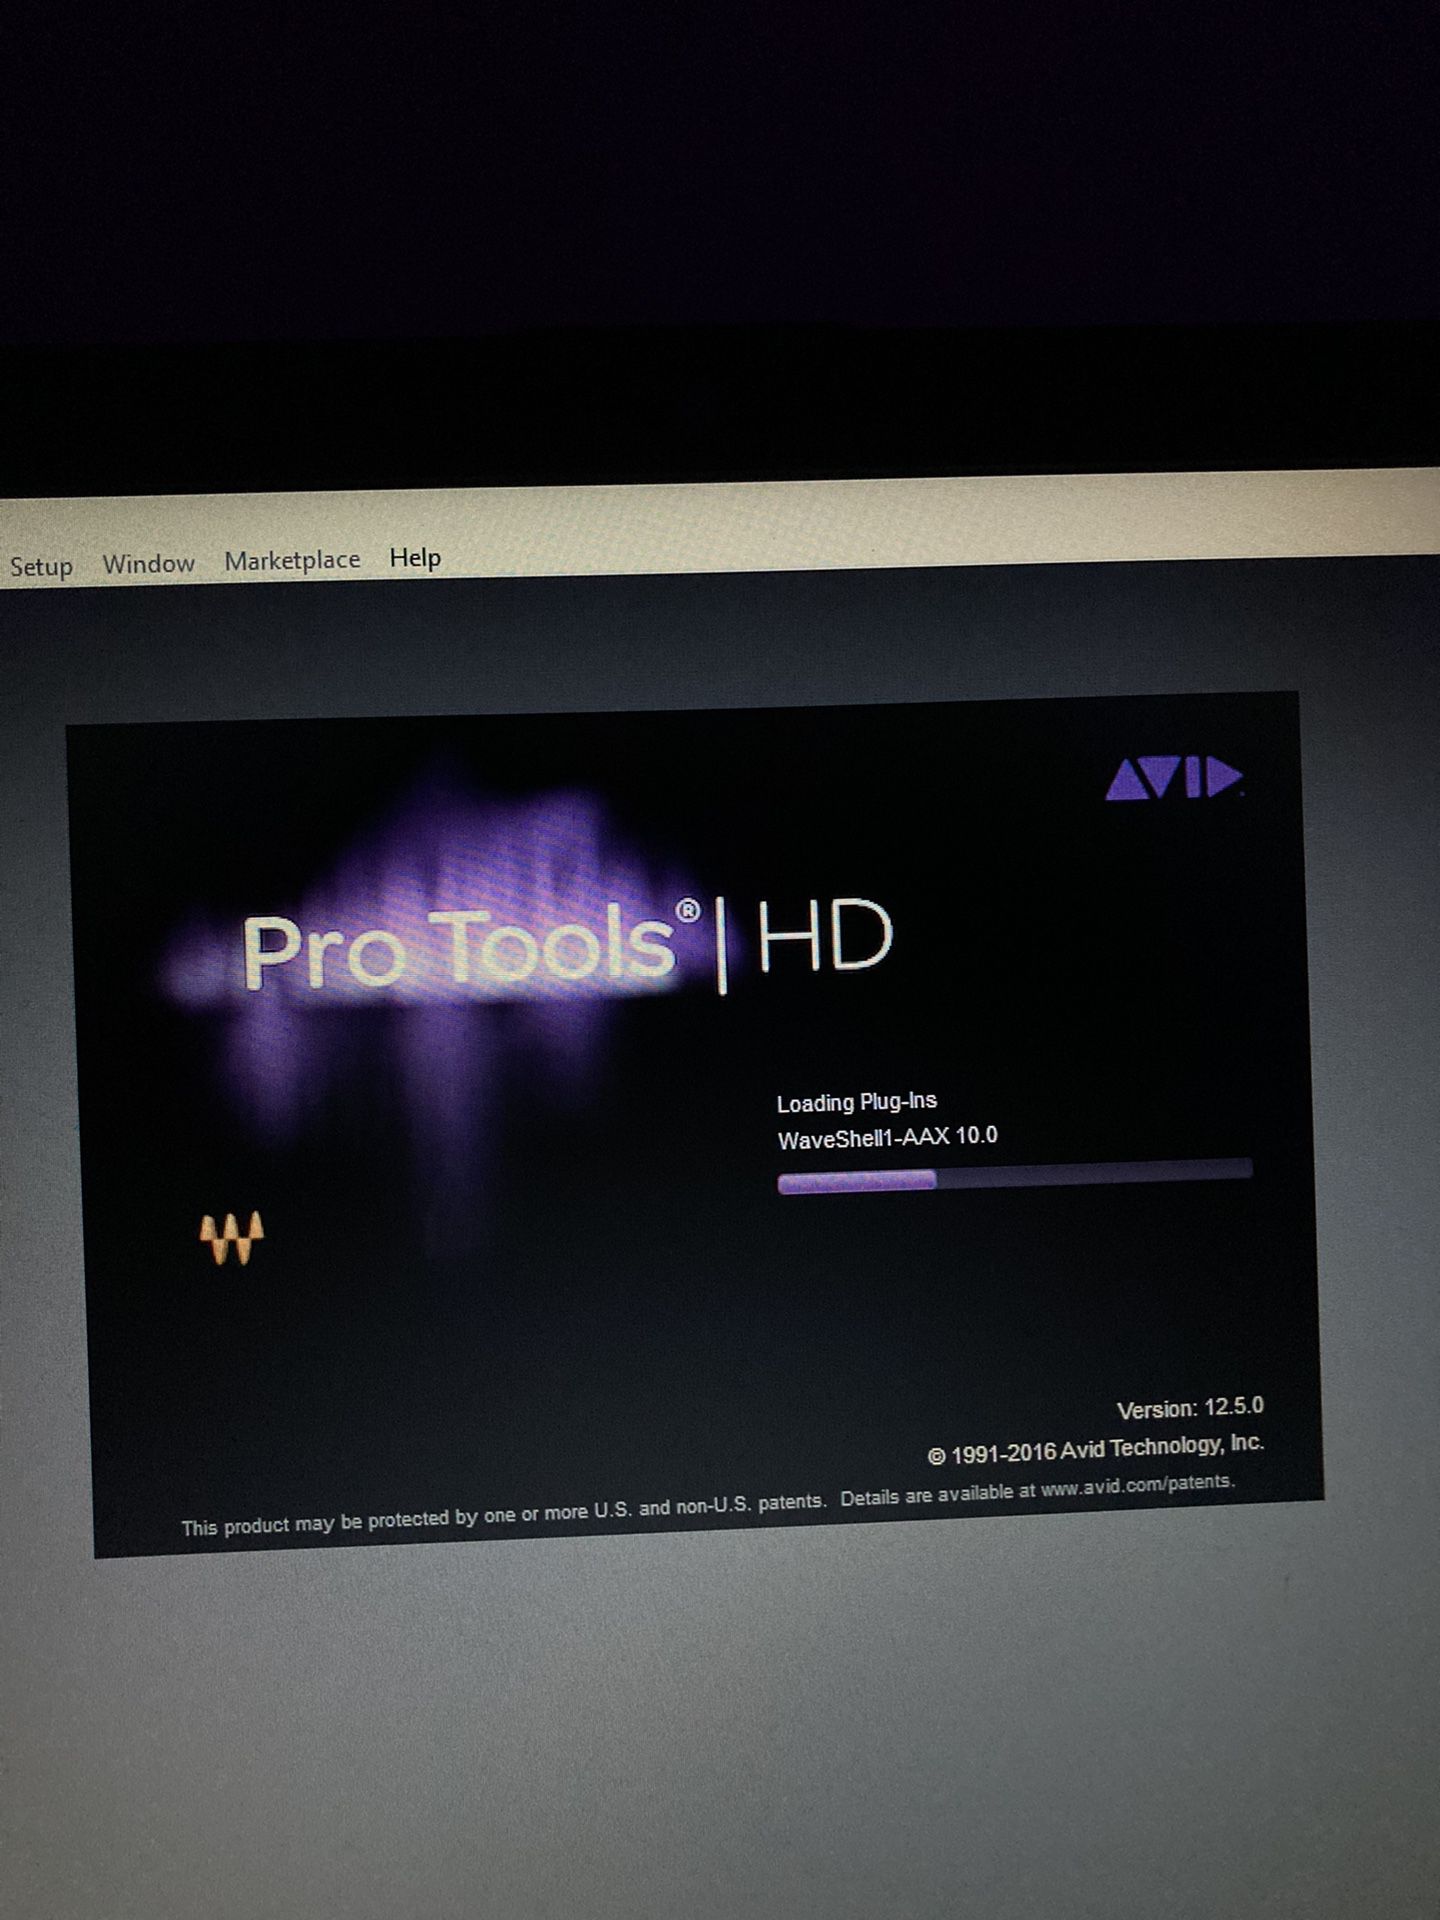 Pro tools & more 50$ Audio software